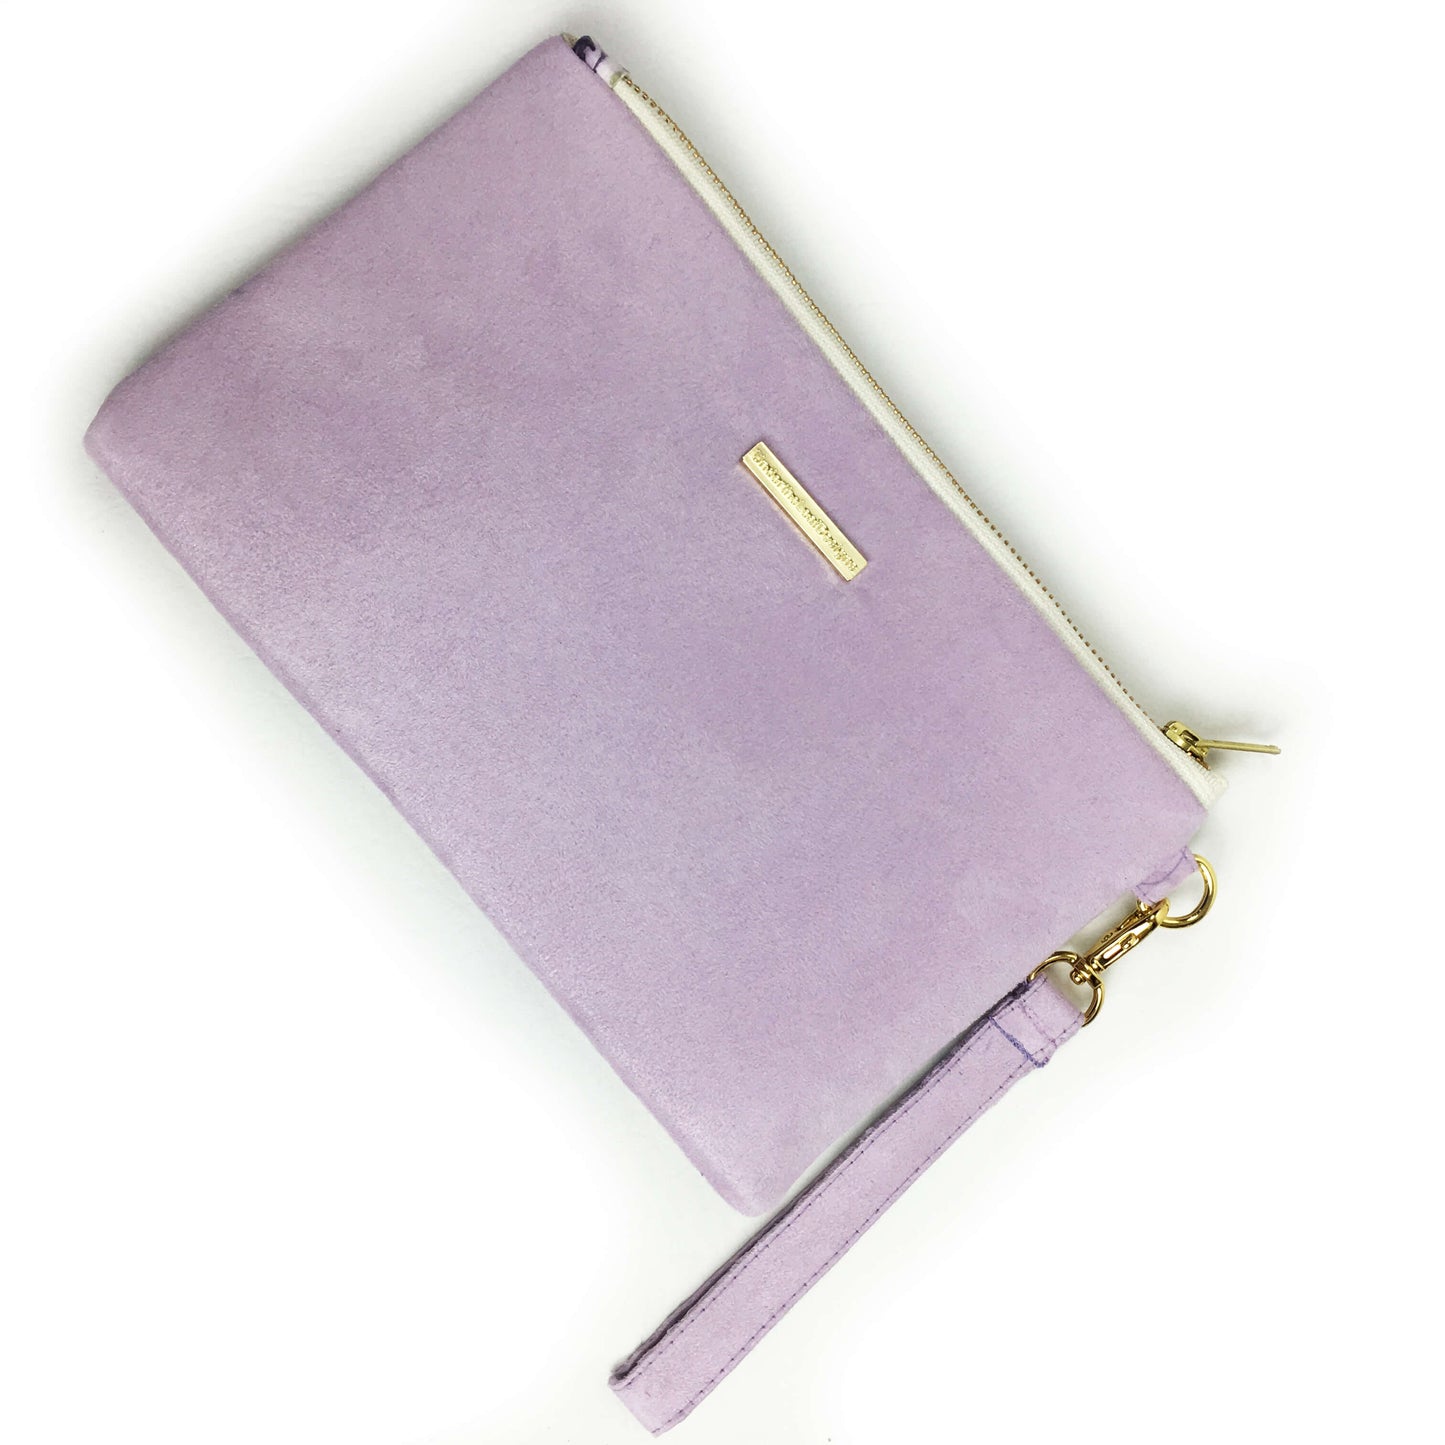 Watercolor mixed floral on lavender wristlet - vegan leather/suede - UndertheLeafDesigns.com